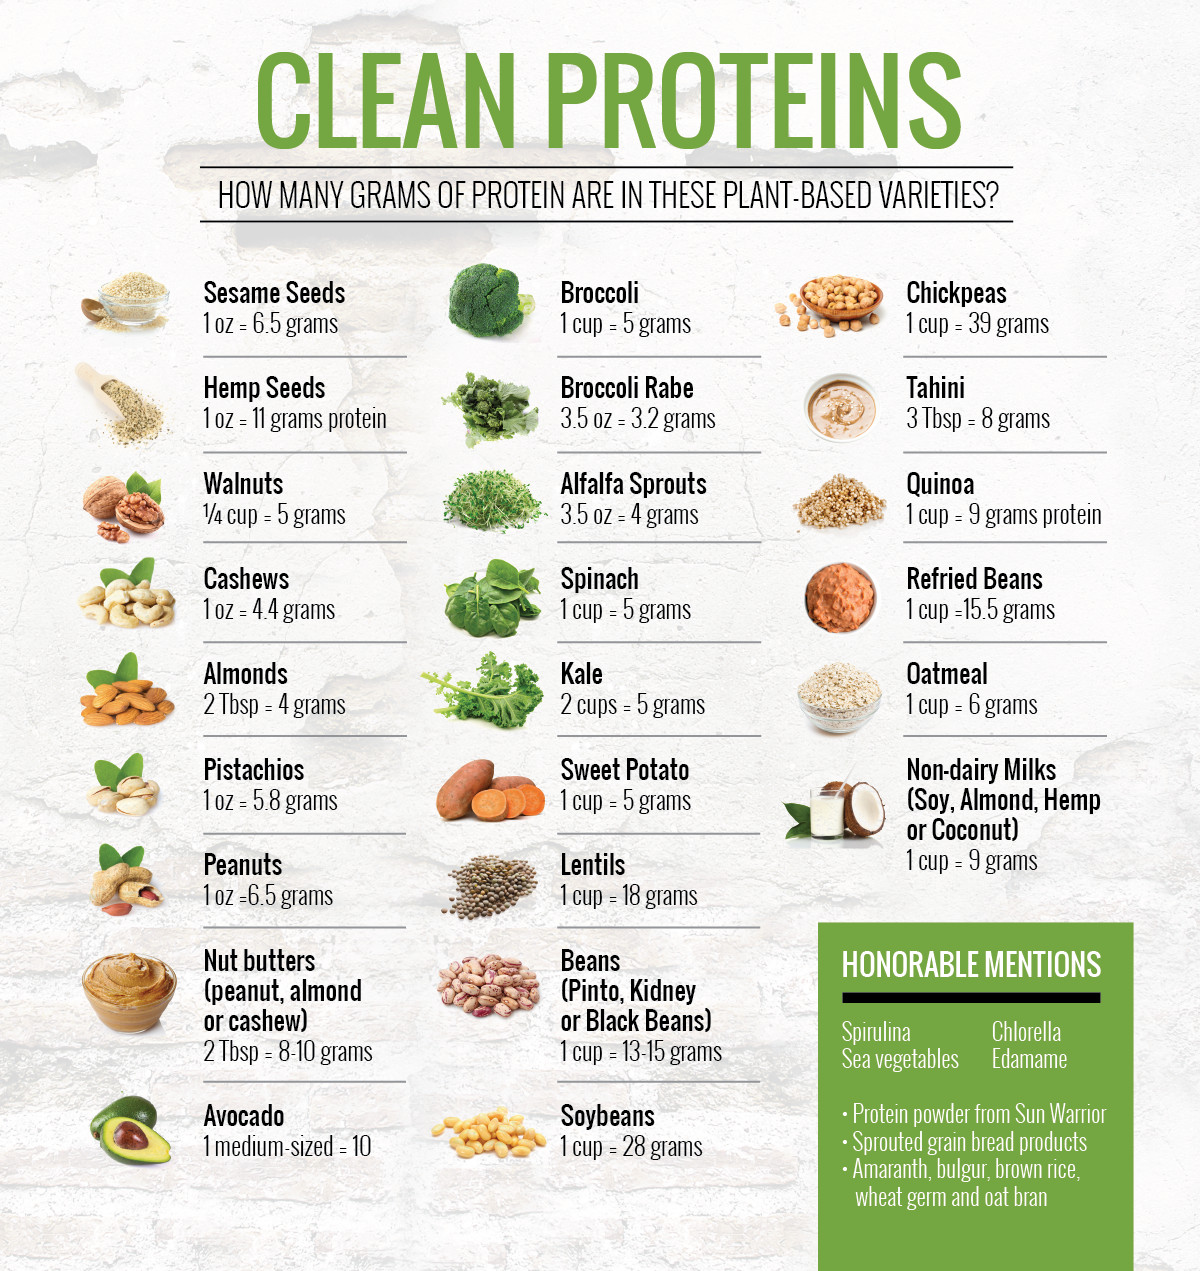 High Protein Low Calorie Vegetarian
 There are many wonderful plantbased proteins to choose